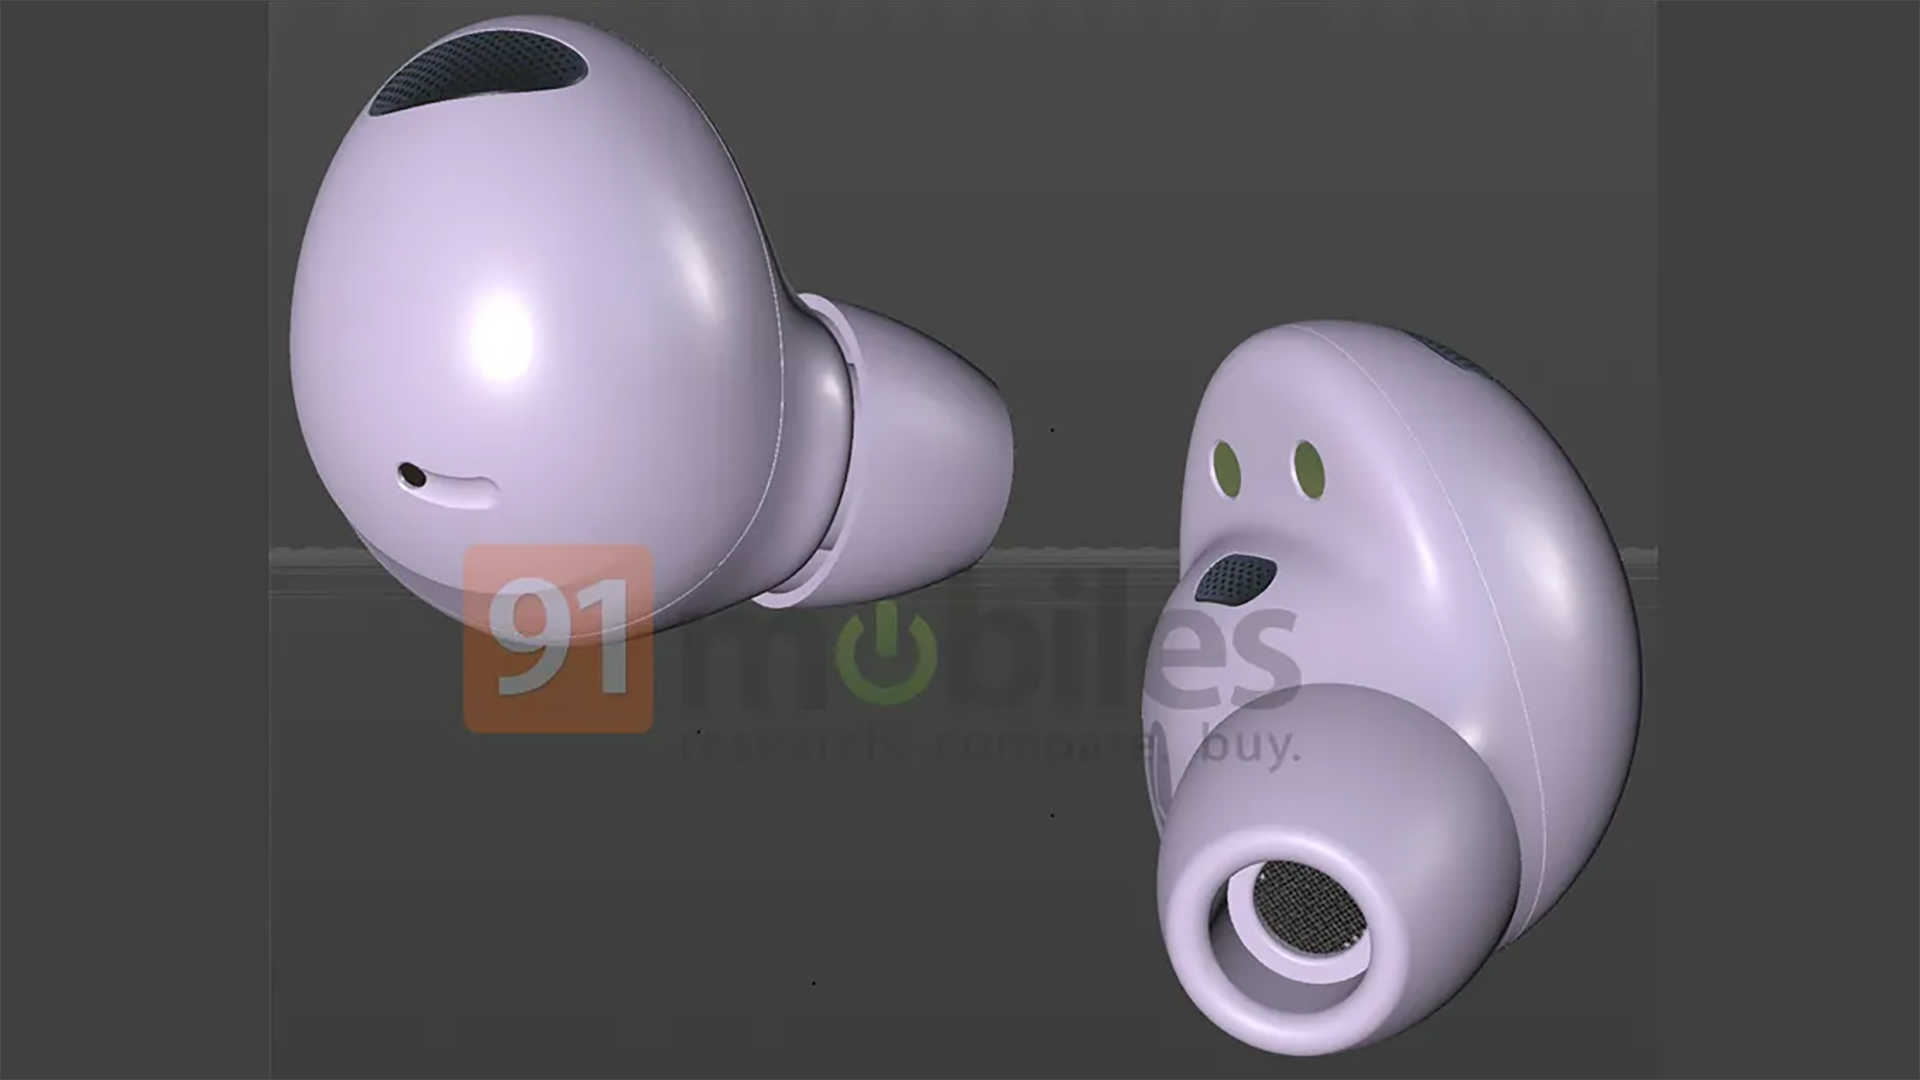 Samsung Galaxy Buds 2 Pro: Release date, price, rumors, and more